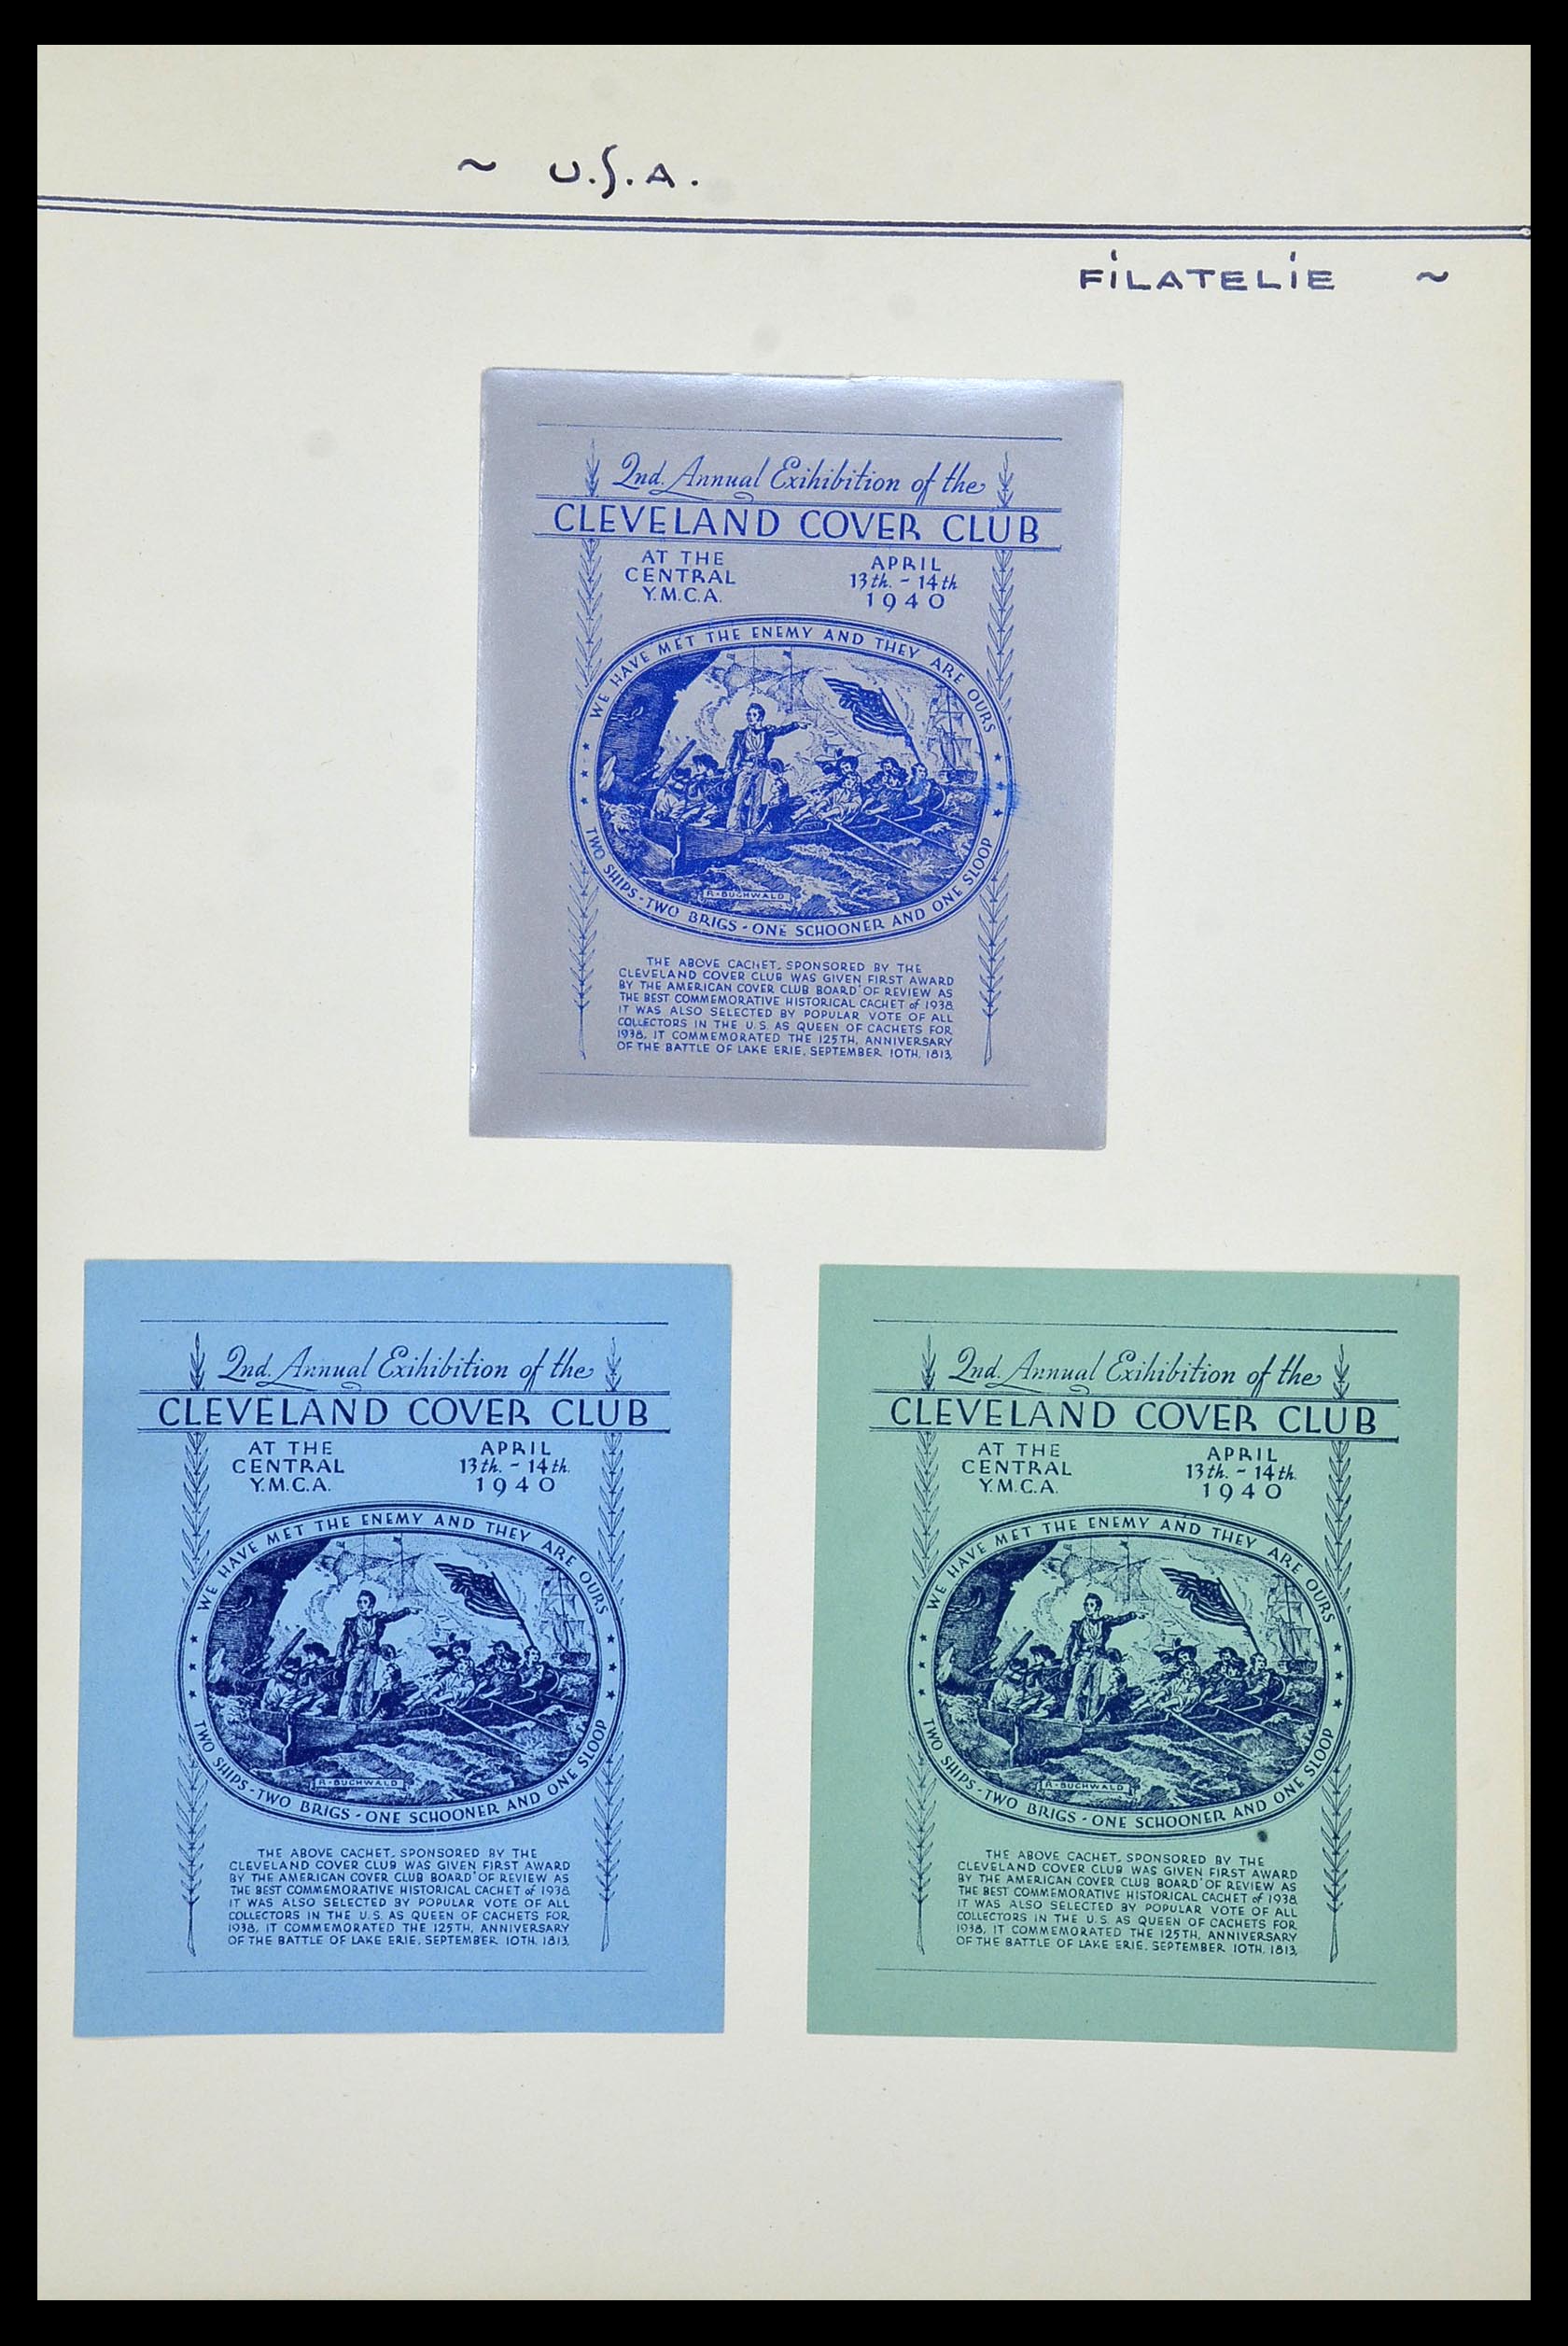 34486 081 - Stamp Collection 34486 USA philatelic labels 1926-1960.